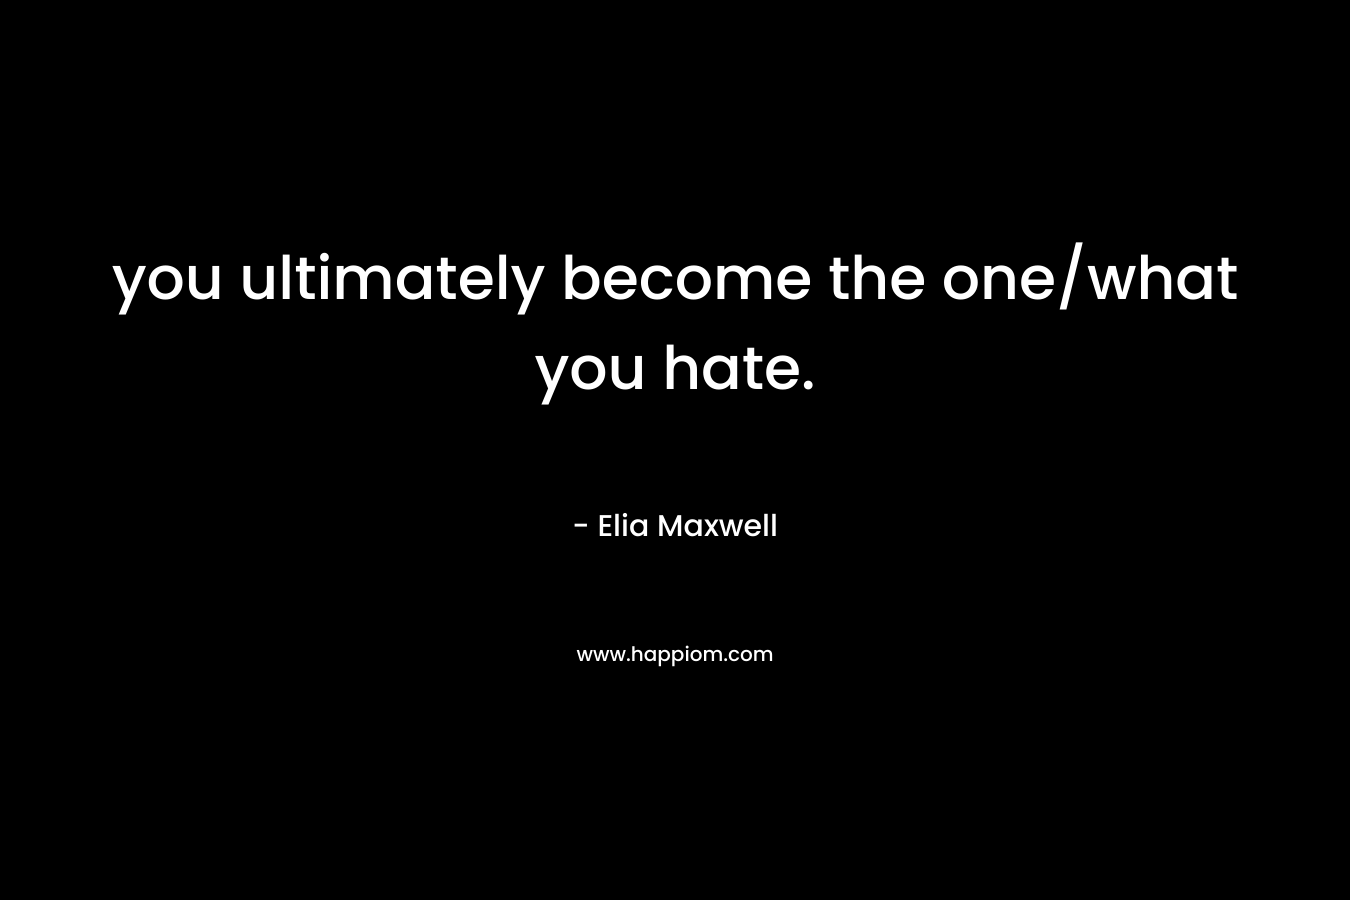 you ultimately become the one/what you hate.